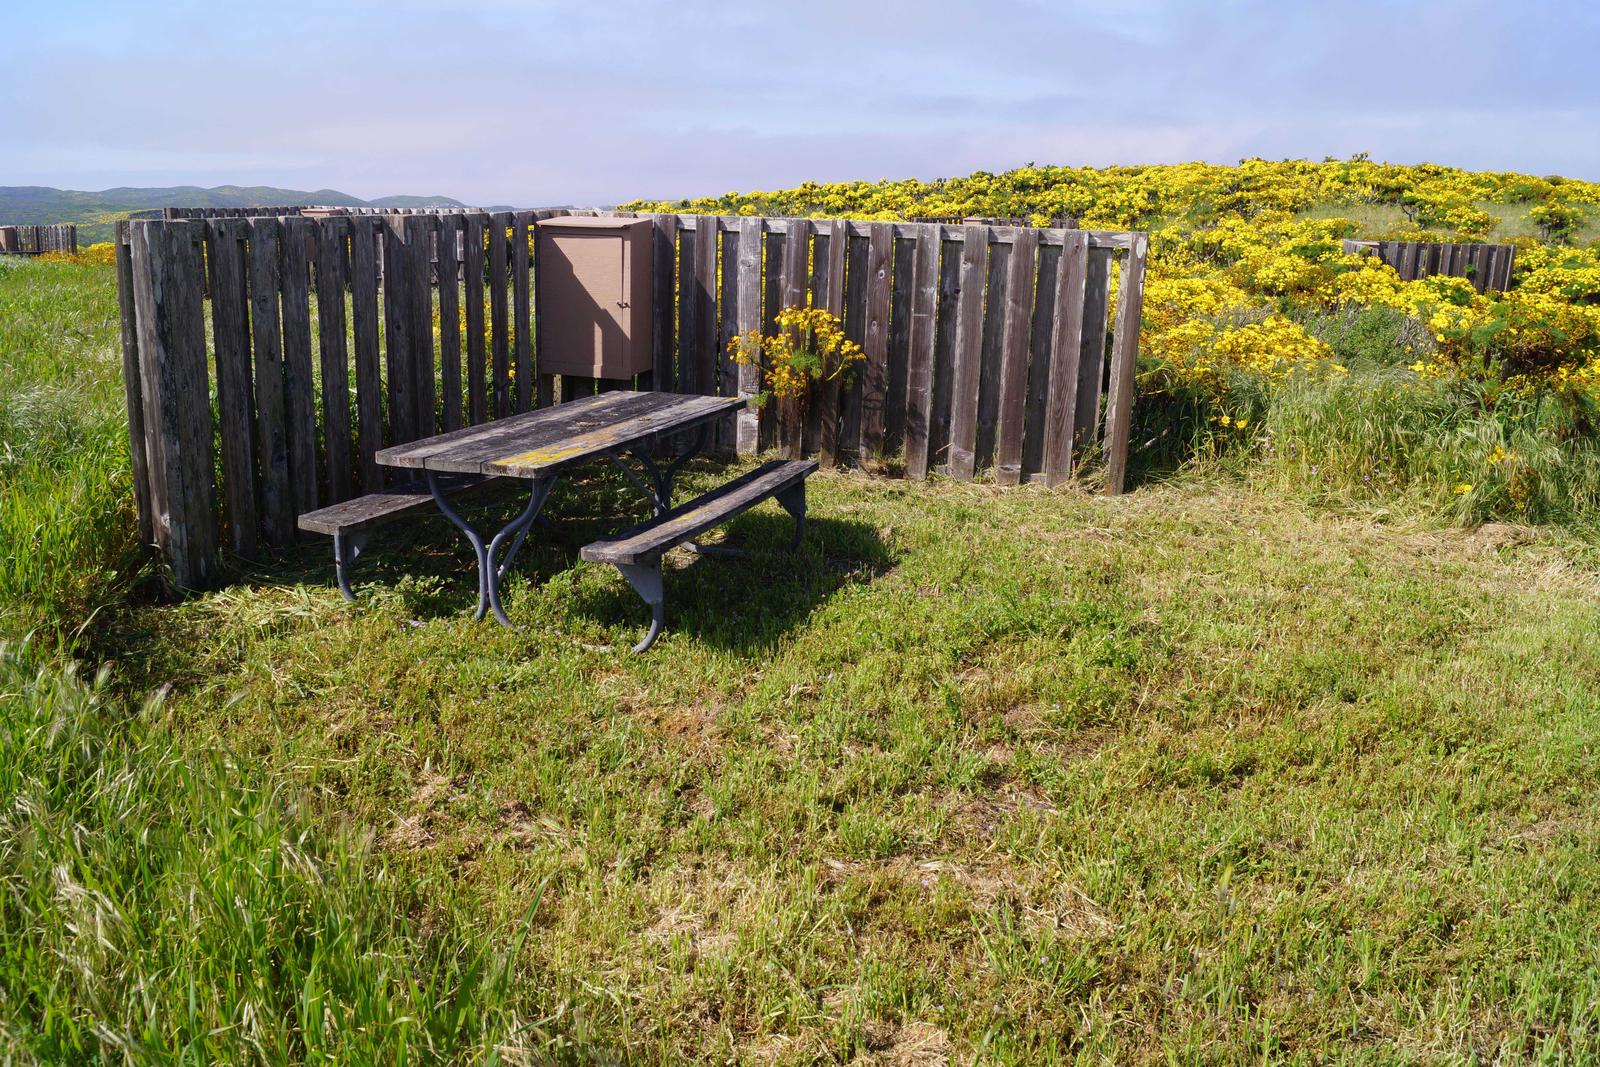 Picnic table and windbreak surrounded by grass and yellow flowered plant.  SAN MIGUEL ISLAND AREA - 008
